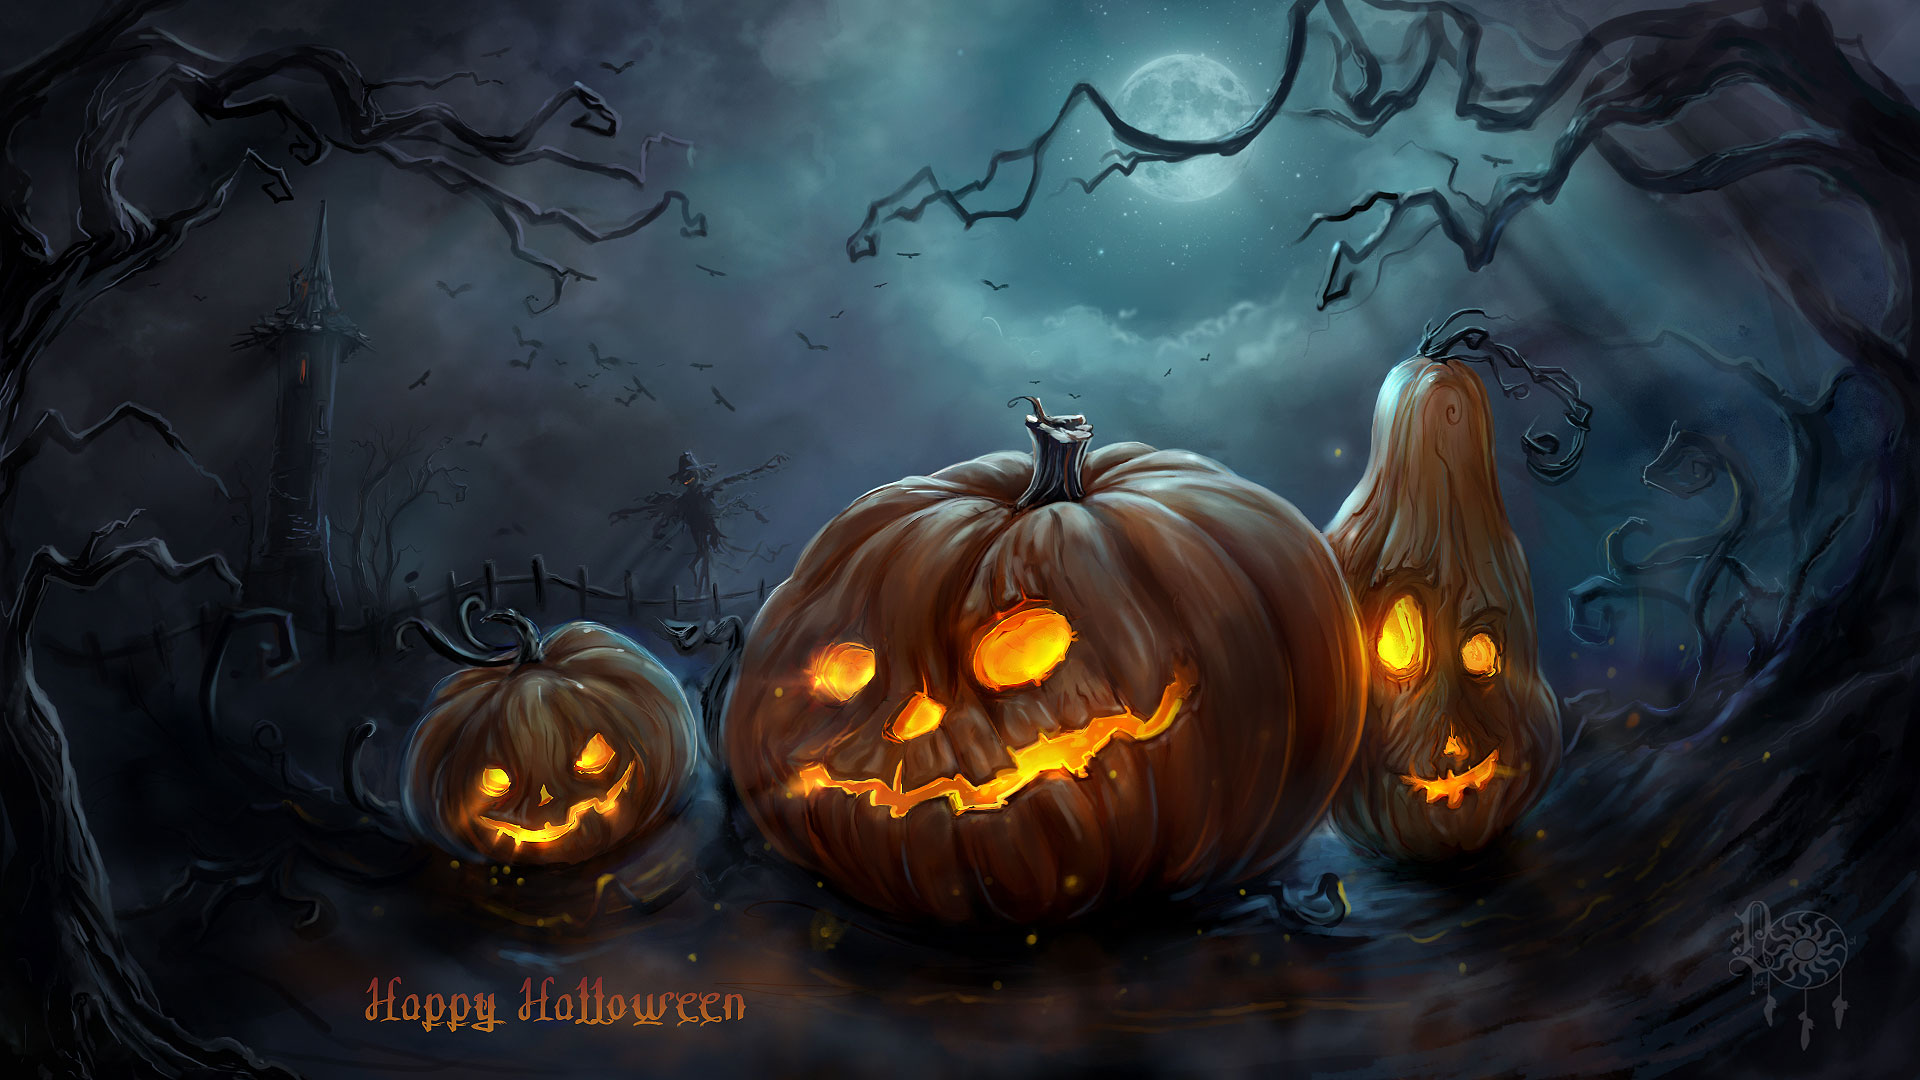  Scary Halloween Backgrounds Wallpaper Collection 2014 1920x1080